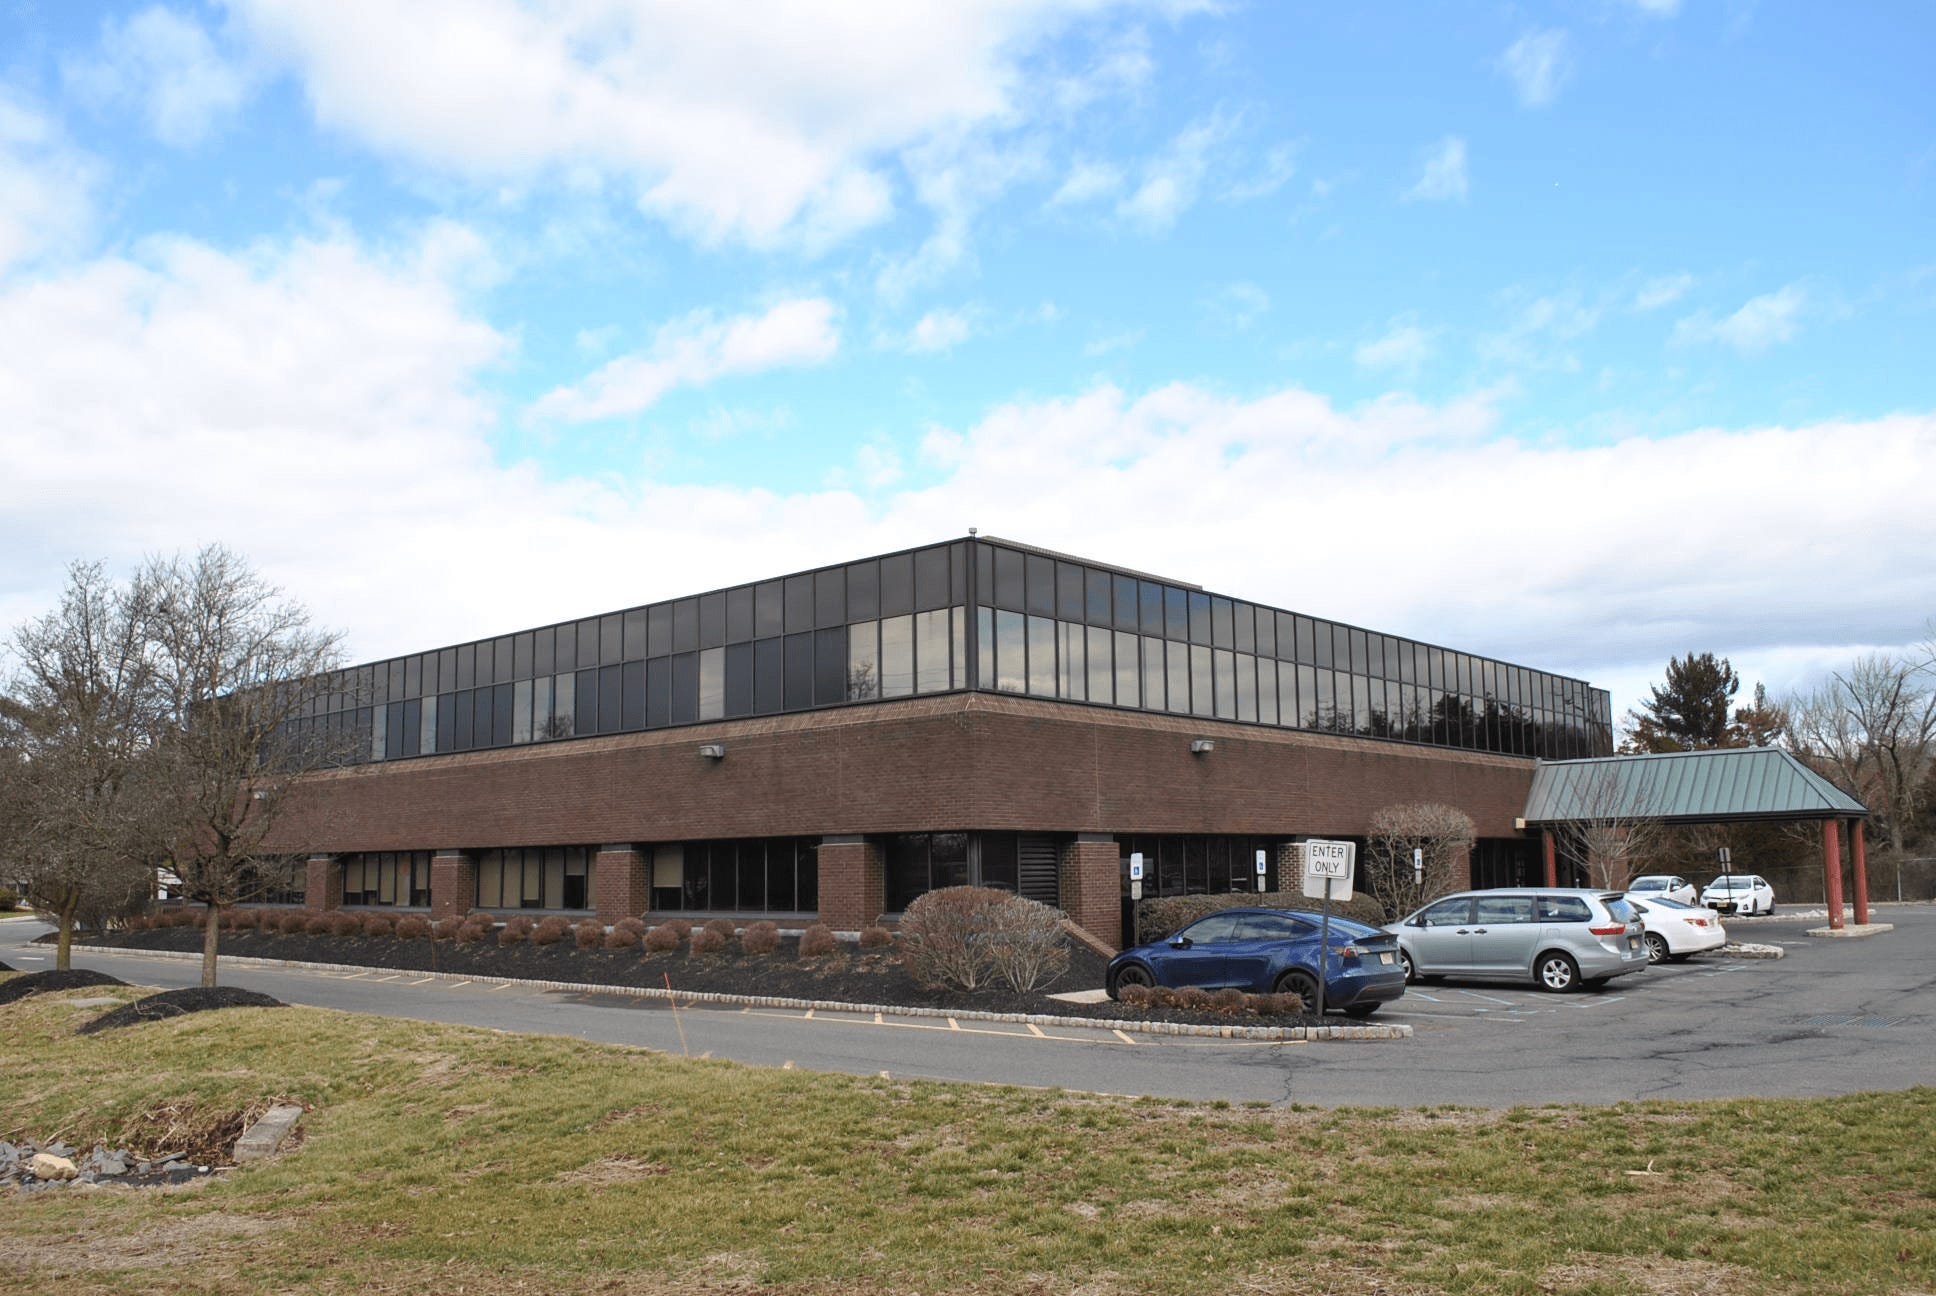 route 22 medical building in bridgewater sold for $10.5 million